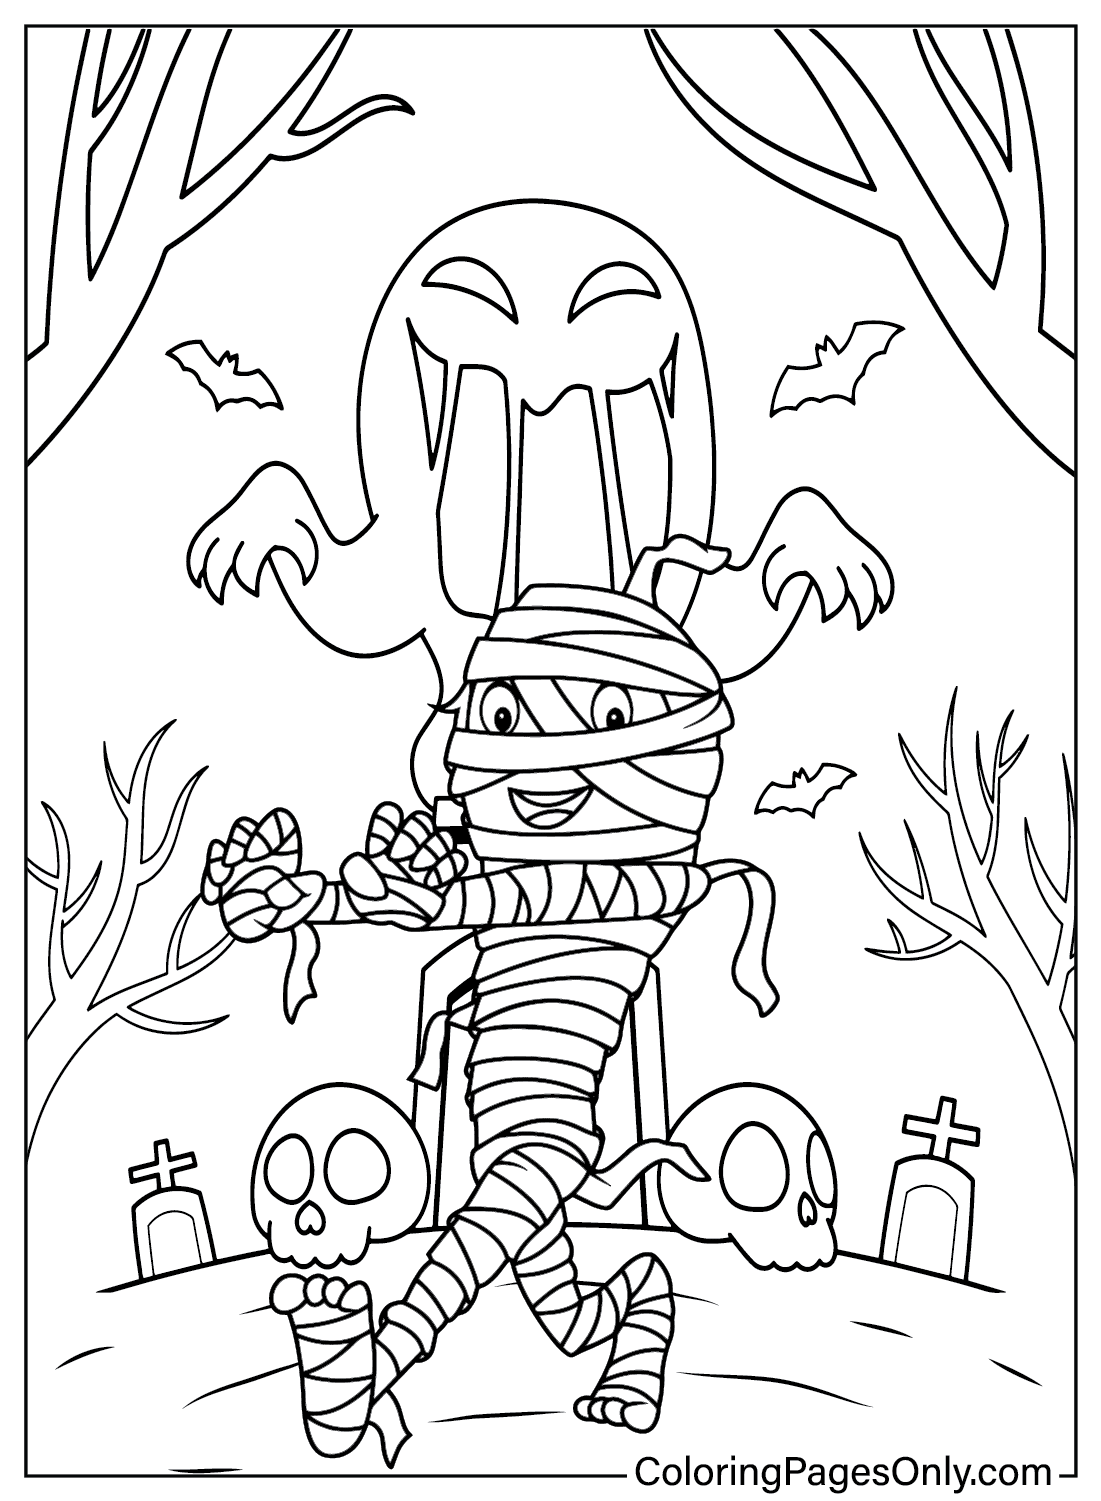 Mummy Coloring Pages to Print